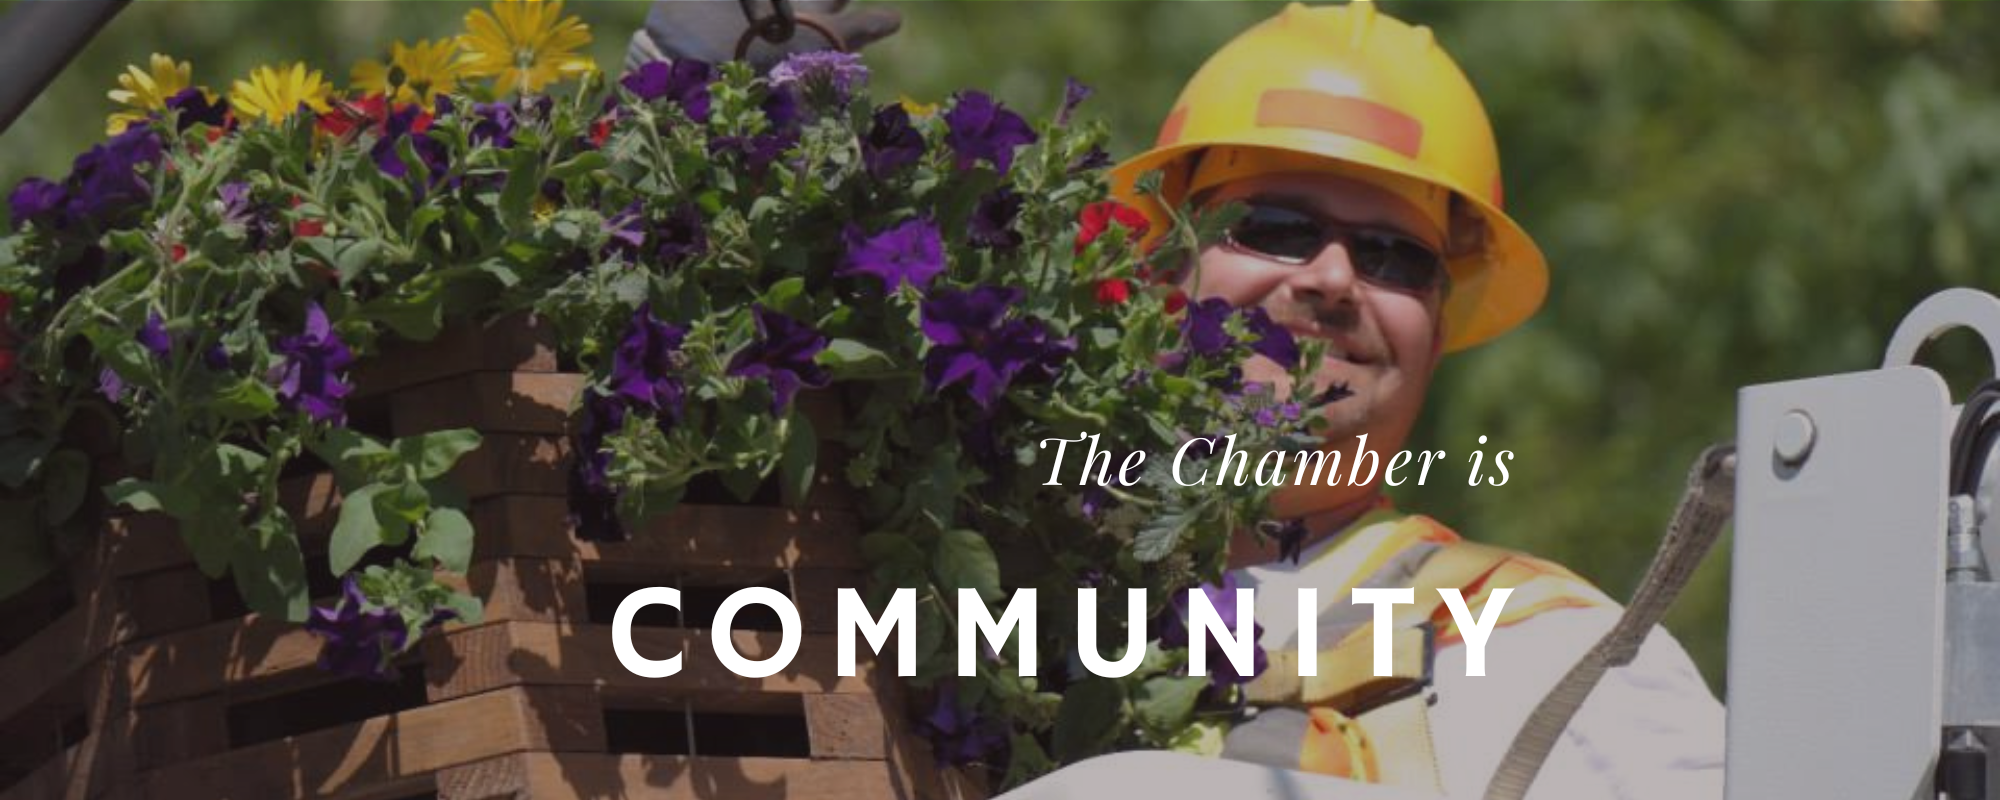 The Chamber is Community: HCC worker hangs a flower basket